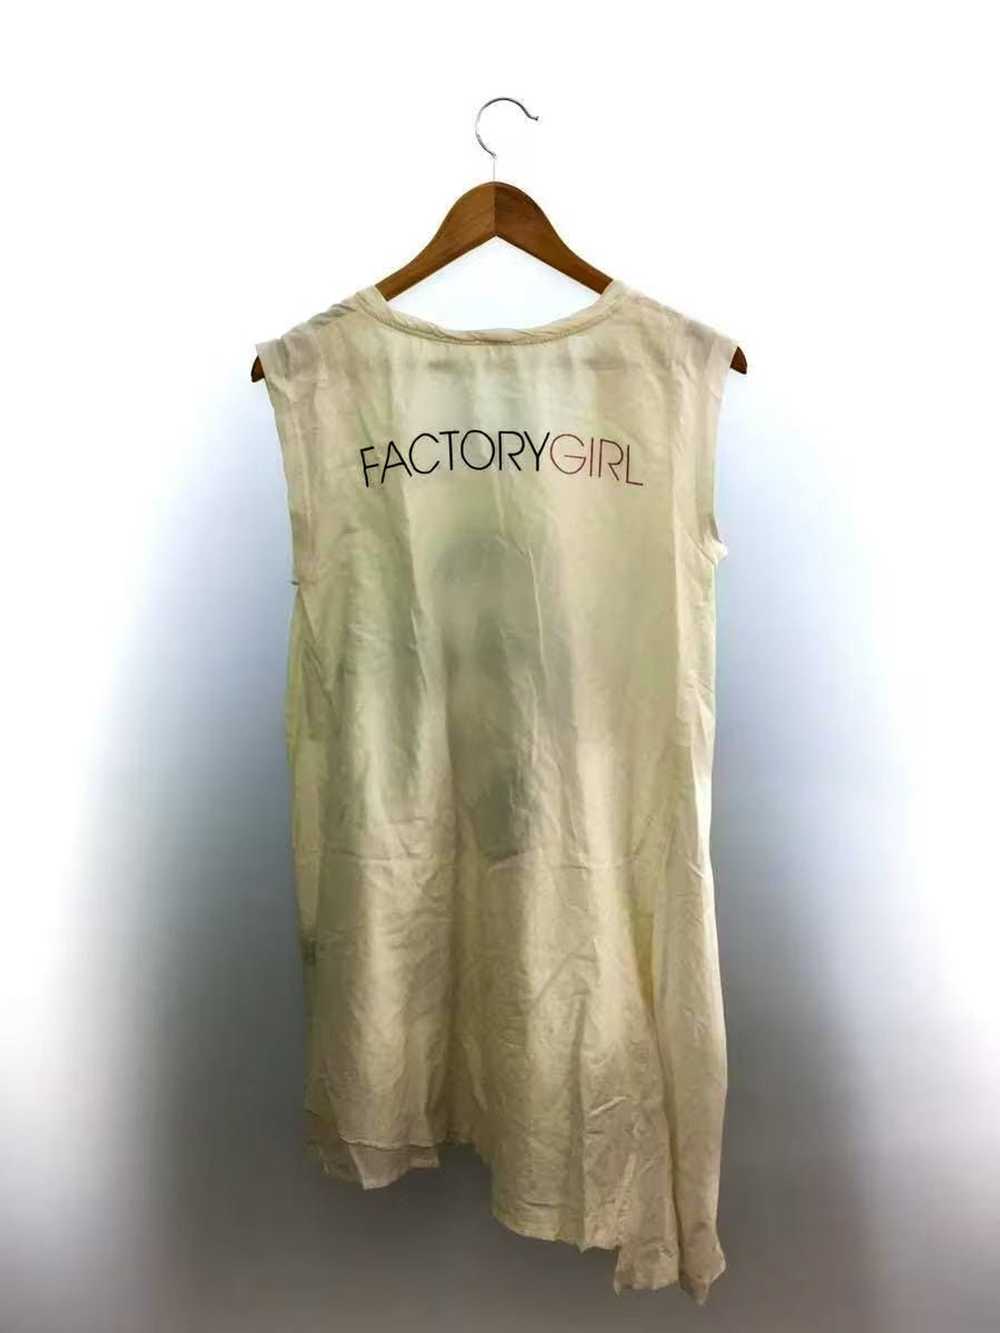 Hysteric Glamour "FACTORYGIRL" Tank Top - image 2